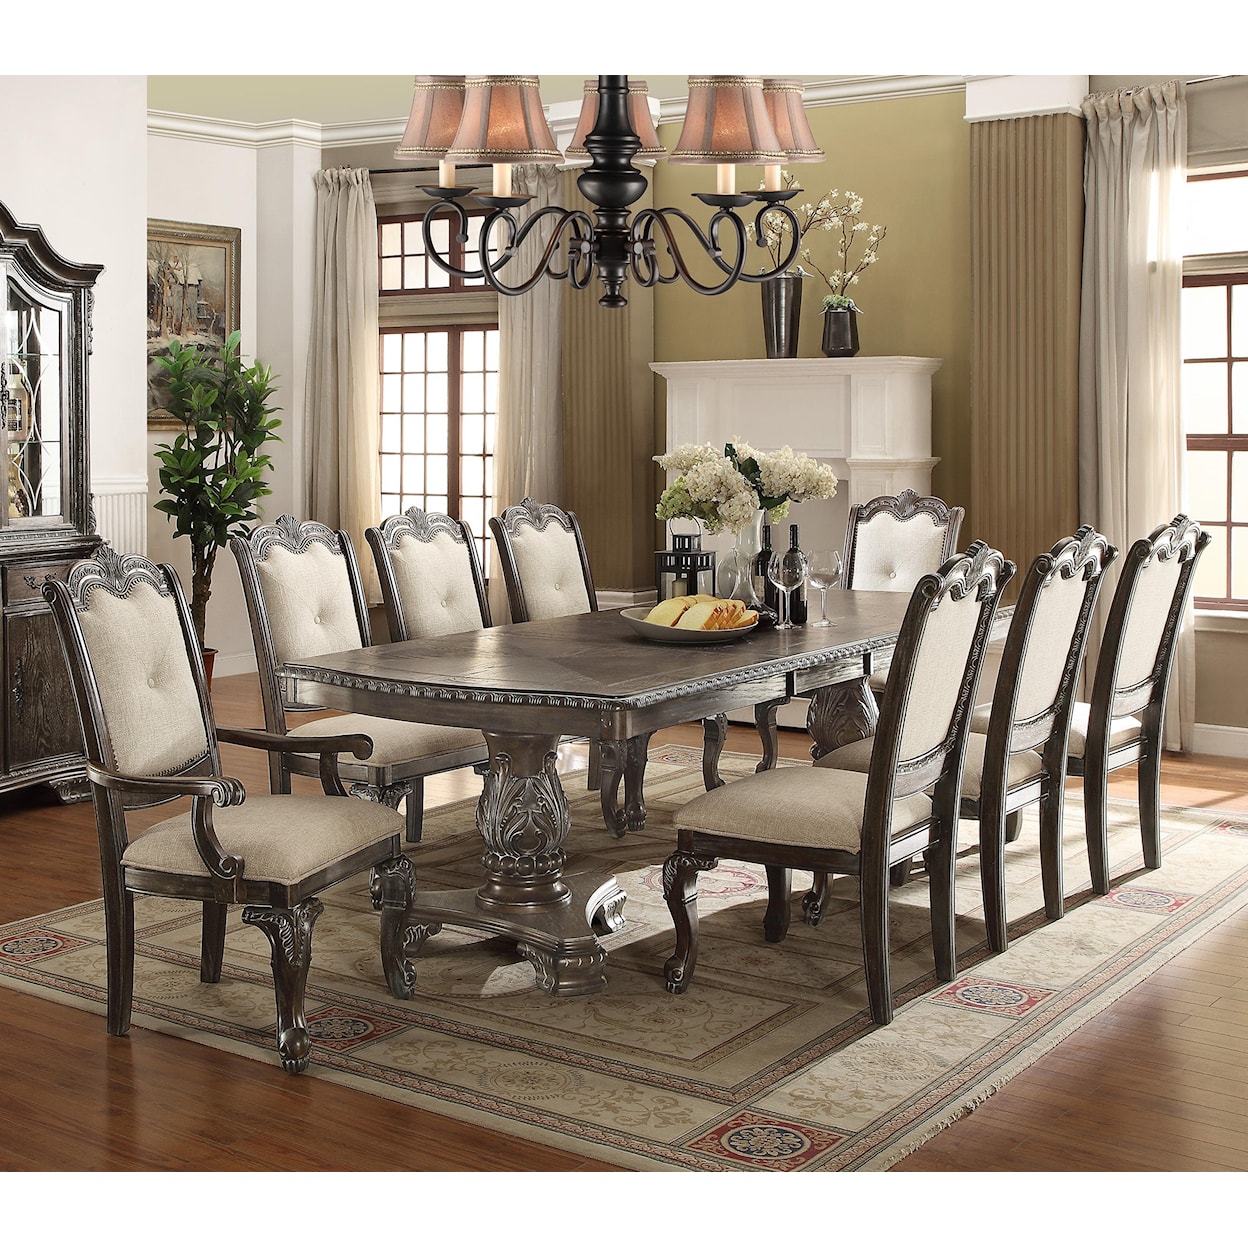 Crown Mark Kiera 5 Piece Table and Chair Set